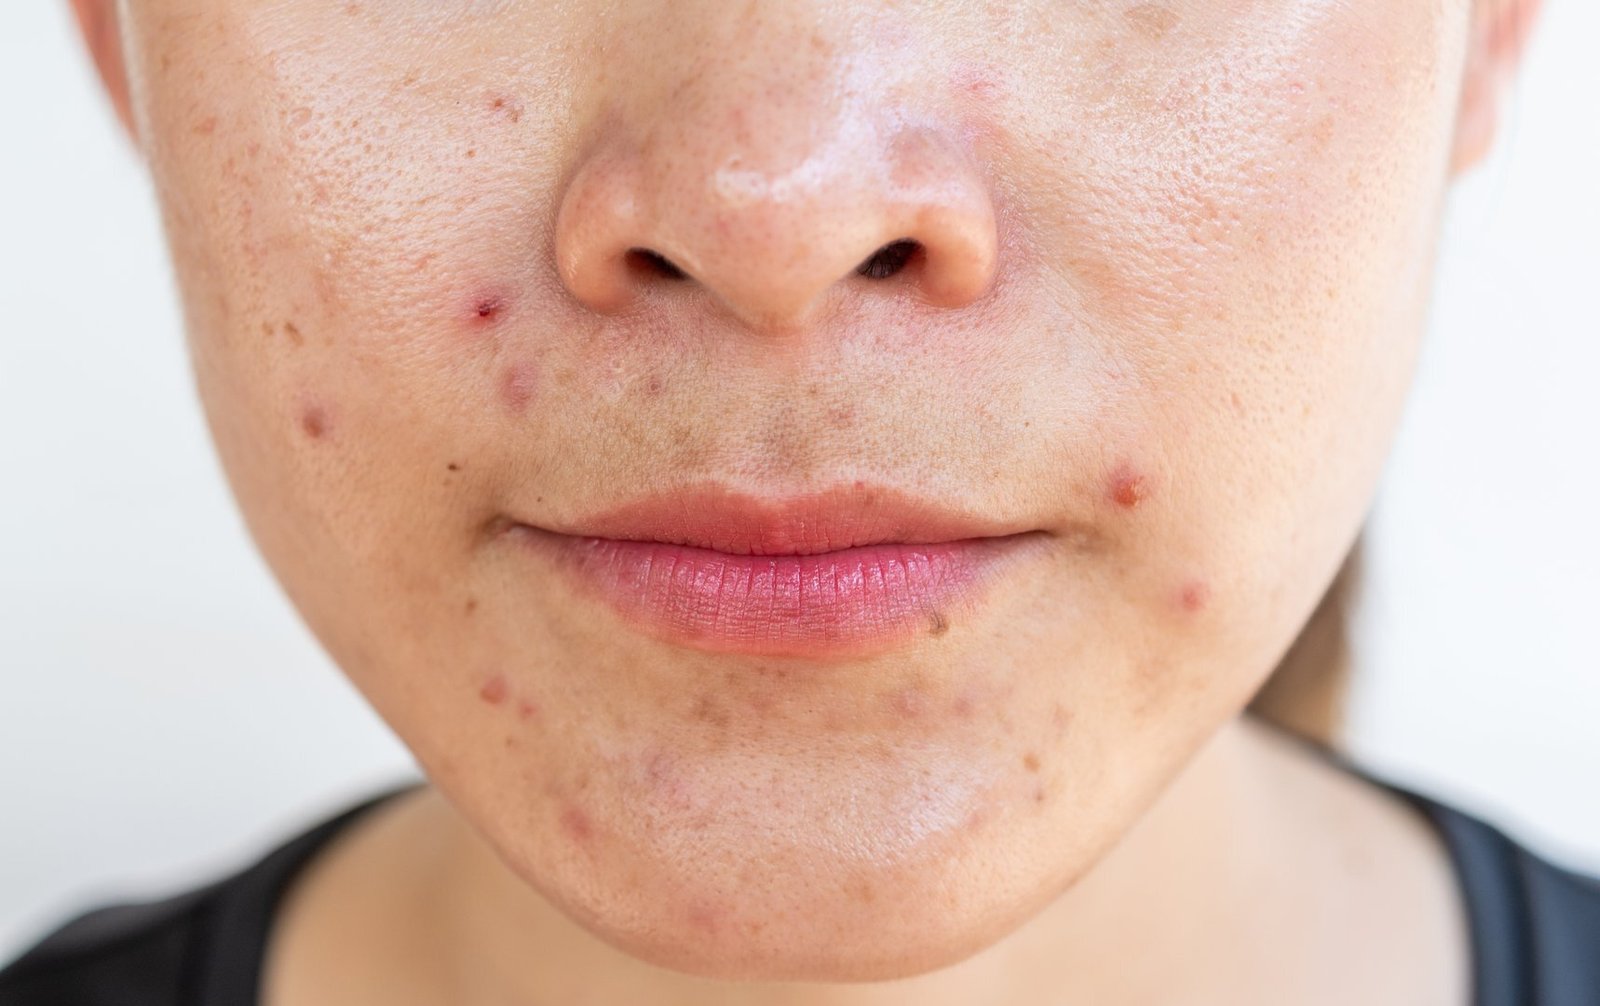 Isotretinoin effective for acne in those receiving gender affirming therapy study shows